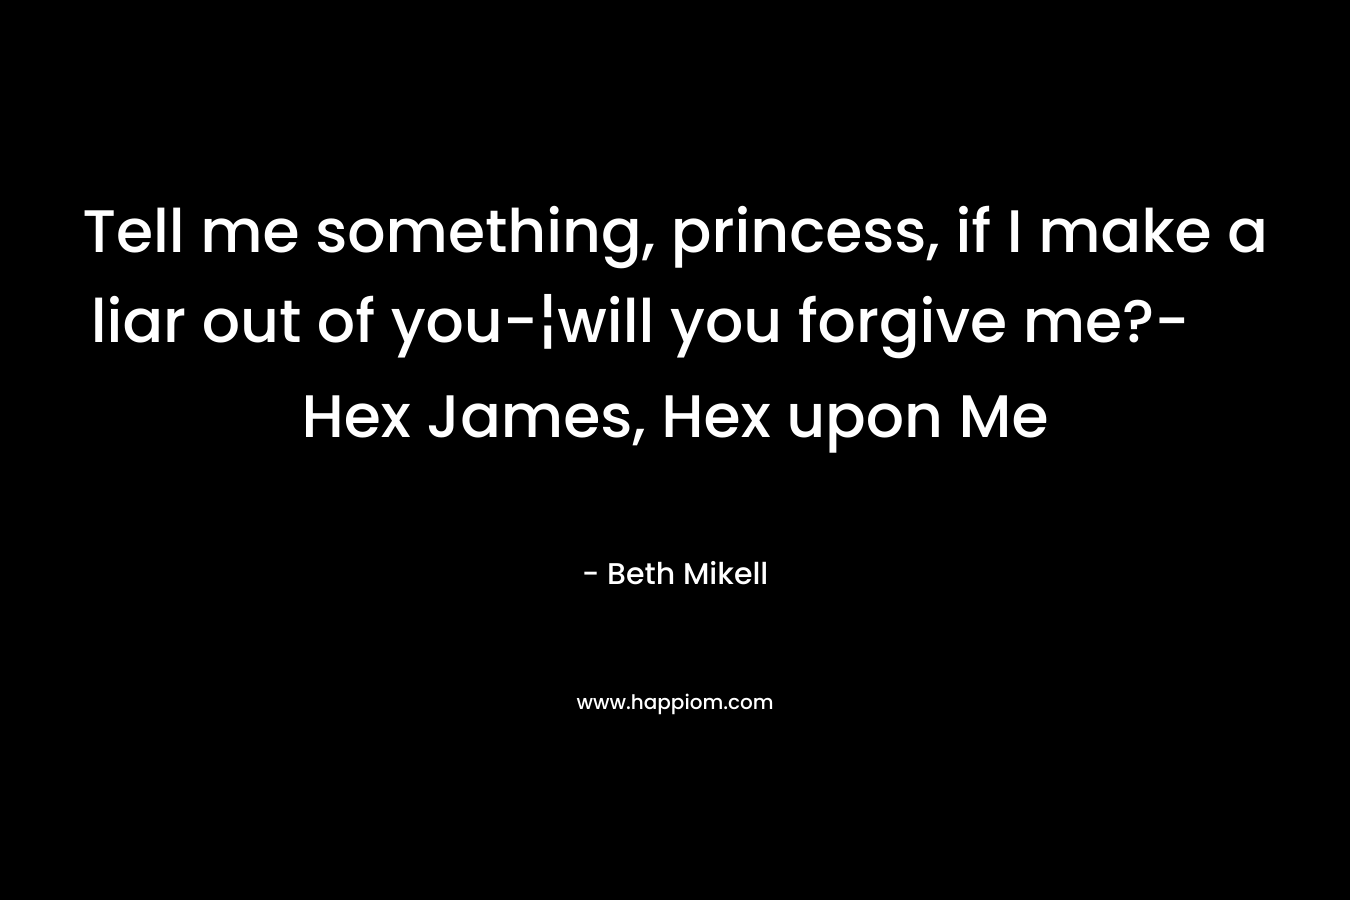 Tell me something, princess, if I make a liar out of you-¦will you forgive me?- Hex James, Hex upon Me